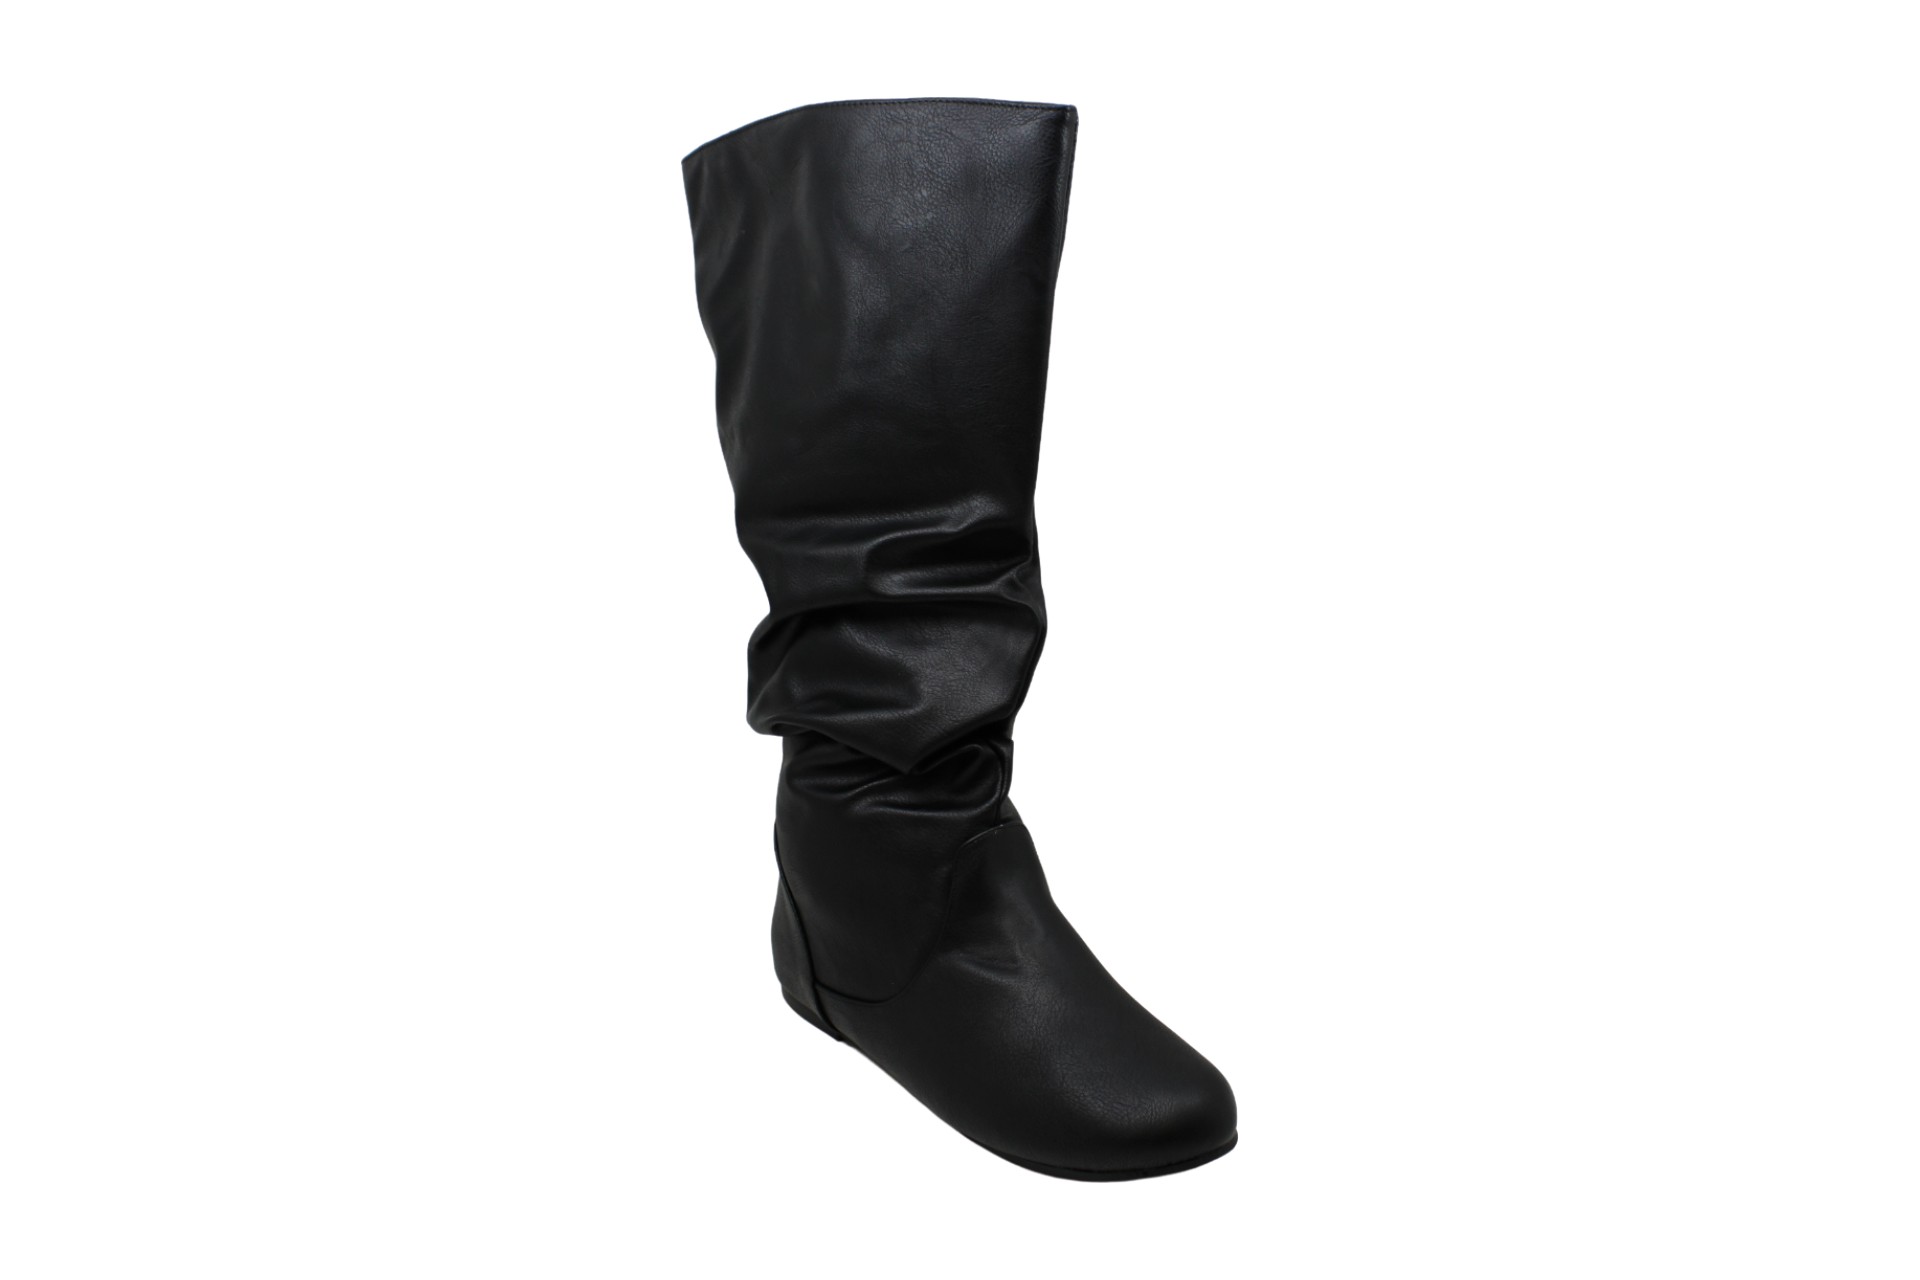 Brinley Co. Womens Extra Wide-Calf Mid-Calf Slouch Riding Boots, Black, Size 7.5 | eBay